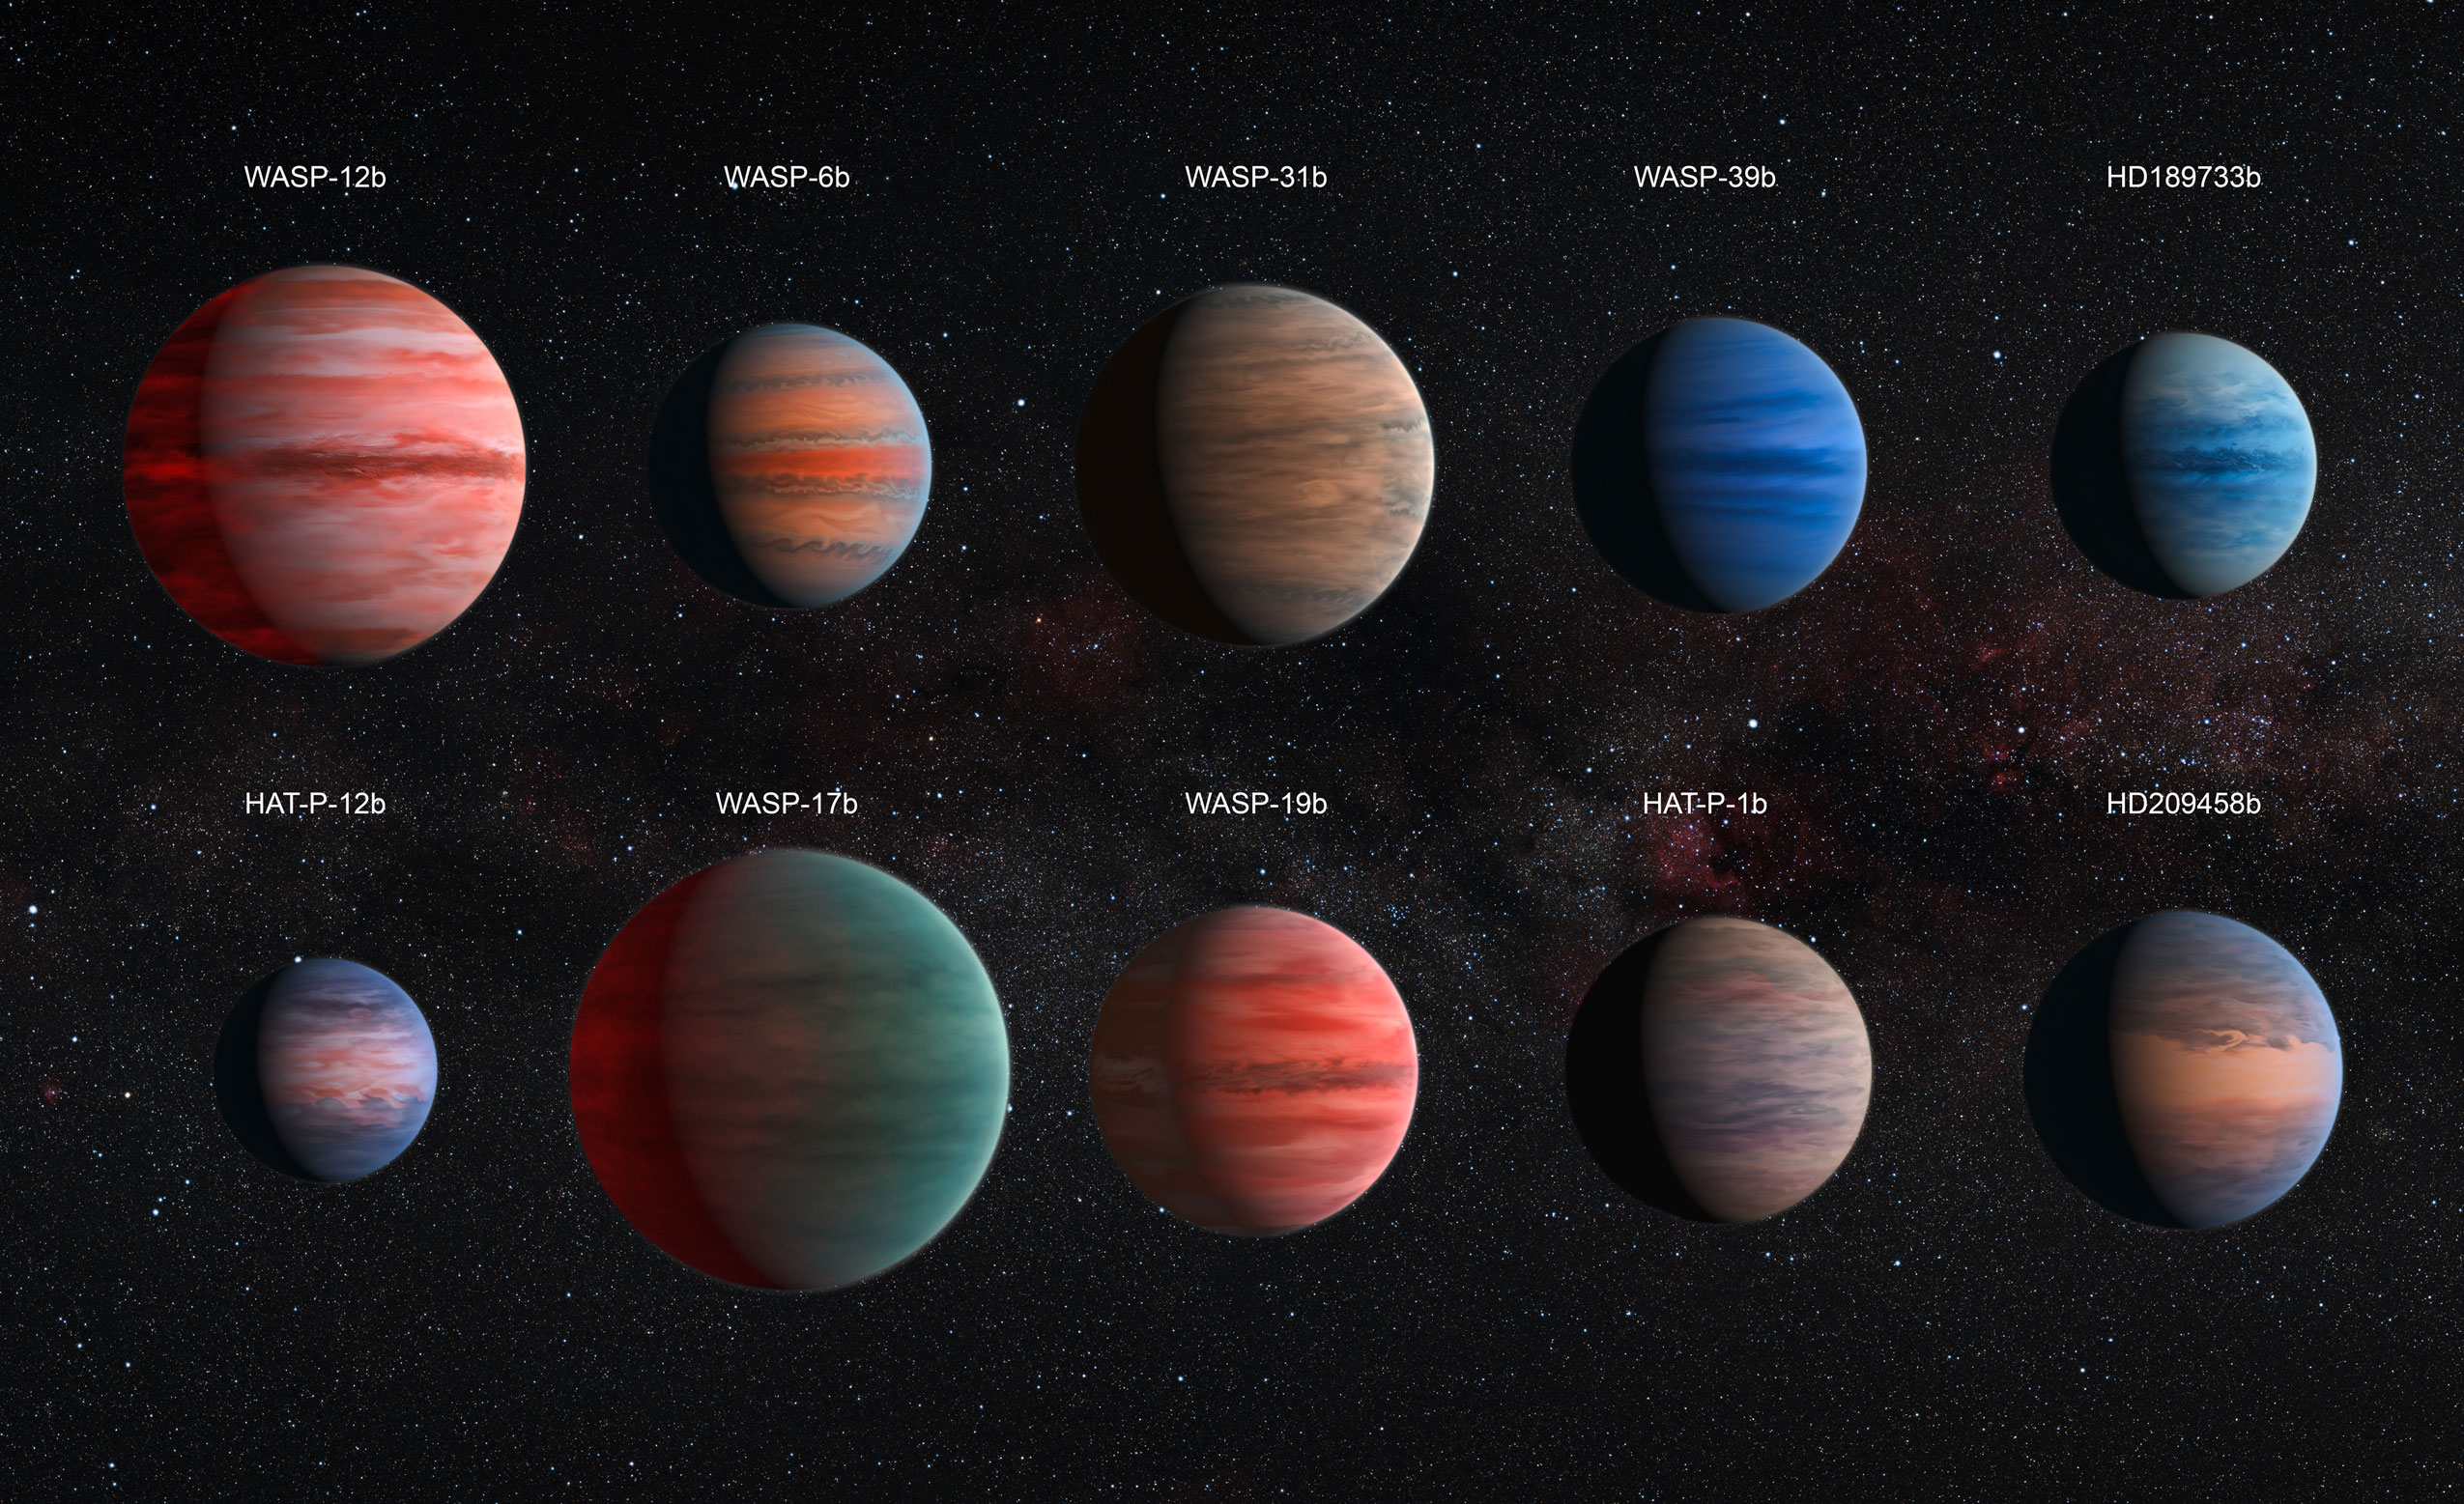 hubble space telescope images of planets